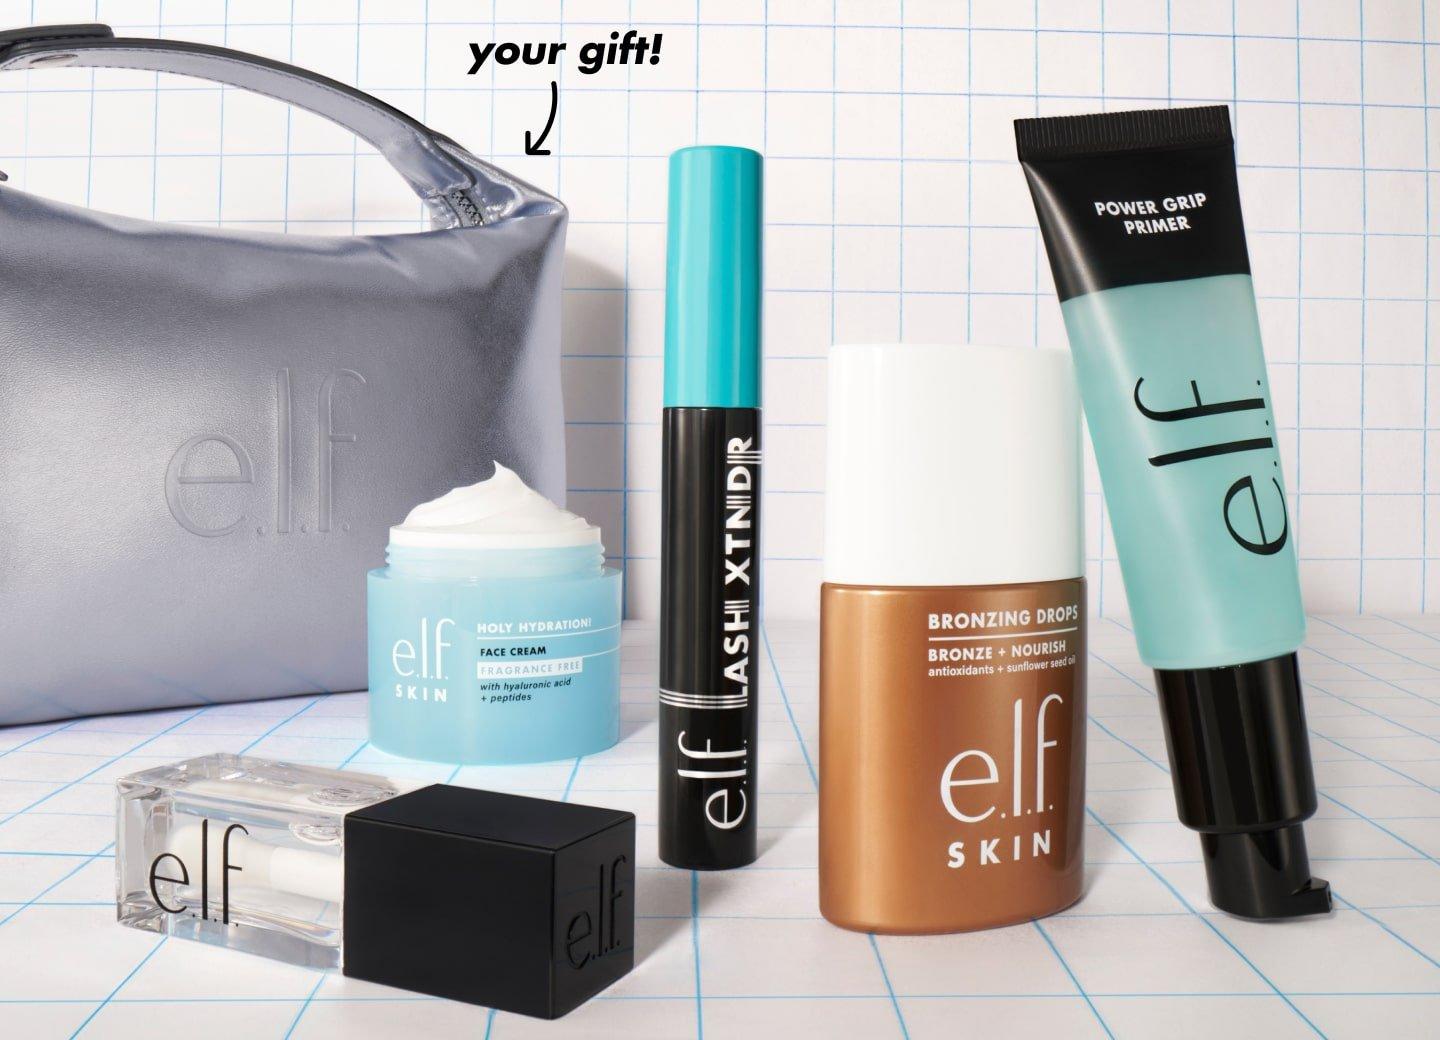 Shop for back to school beauty products